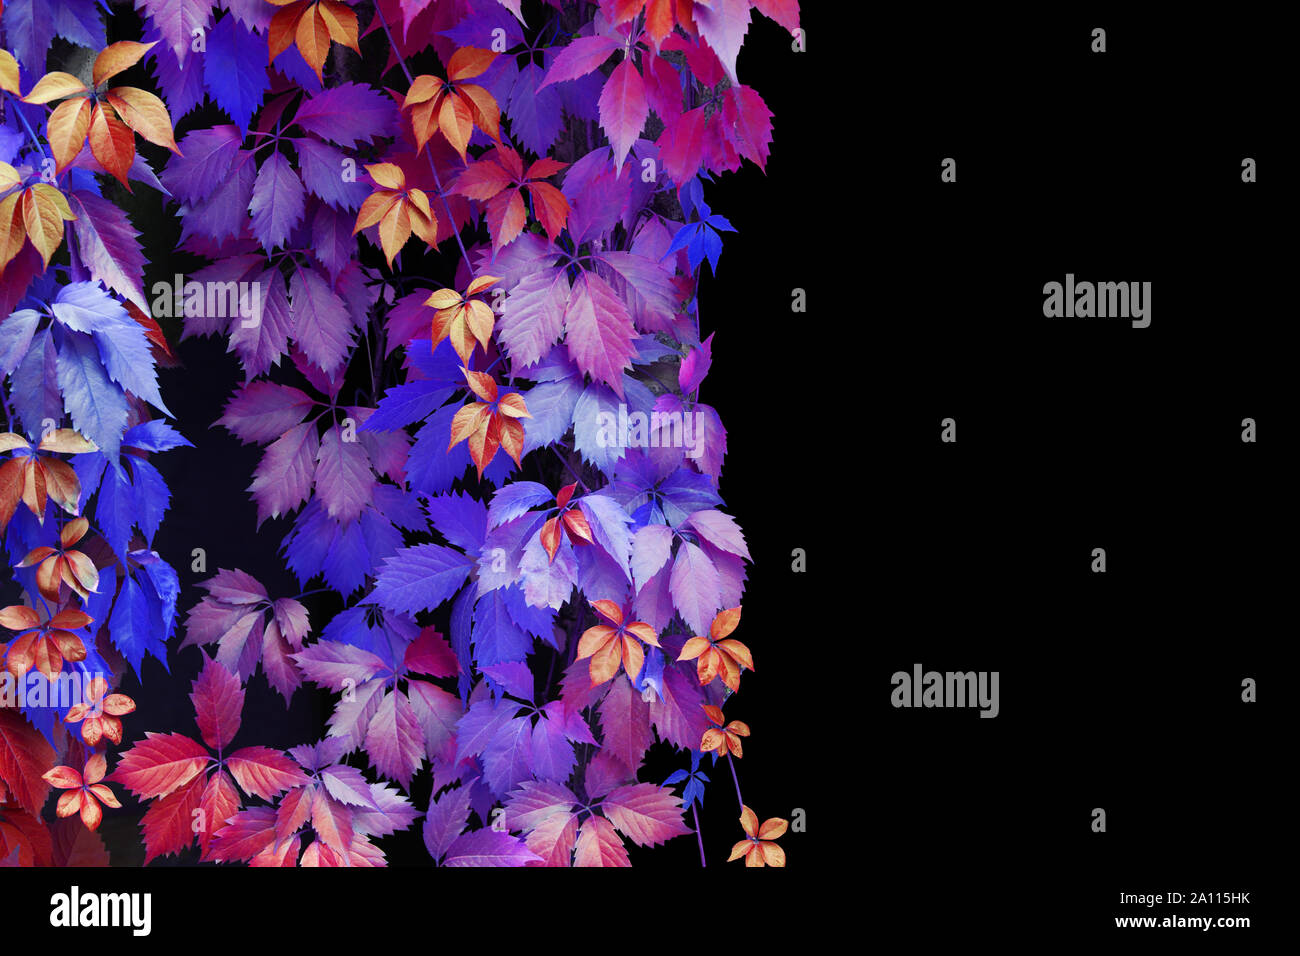 Abstract Blue Purple Pink Red Yellow Girlish Grape Leaves Decorative Pattern On Black Background Isolated Close Up Copy Space Stock Photo Alamy